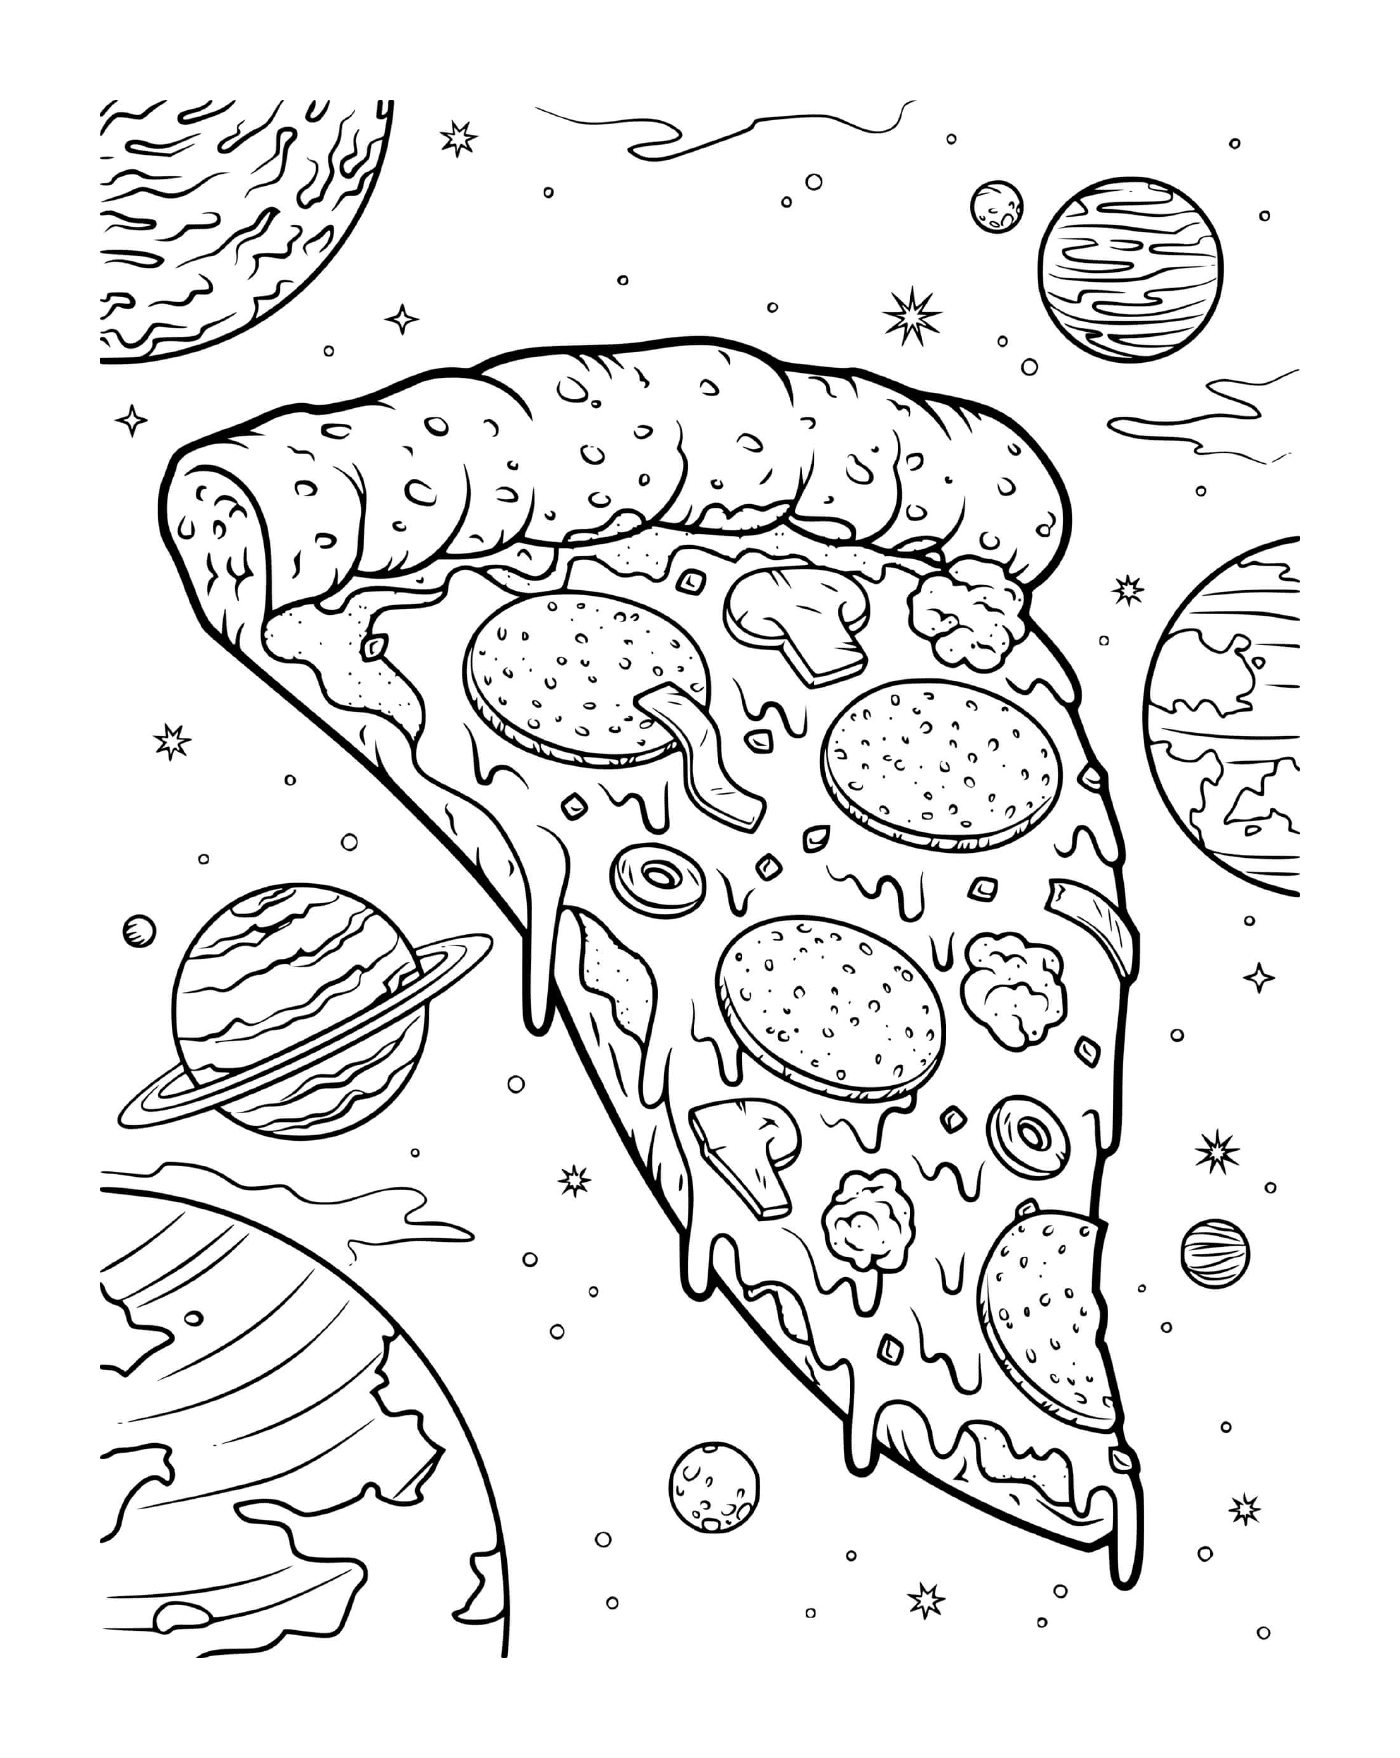  A cheese mushroom pizza in space 